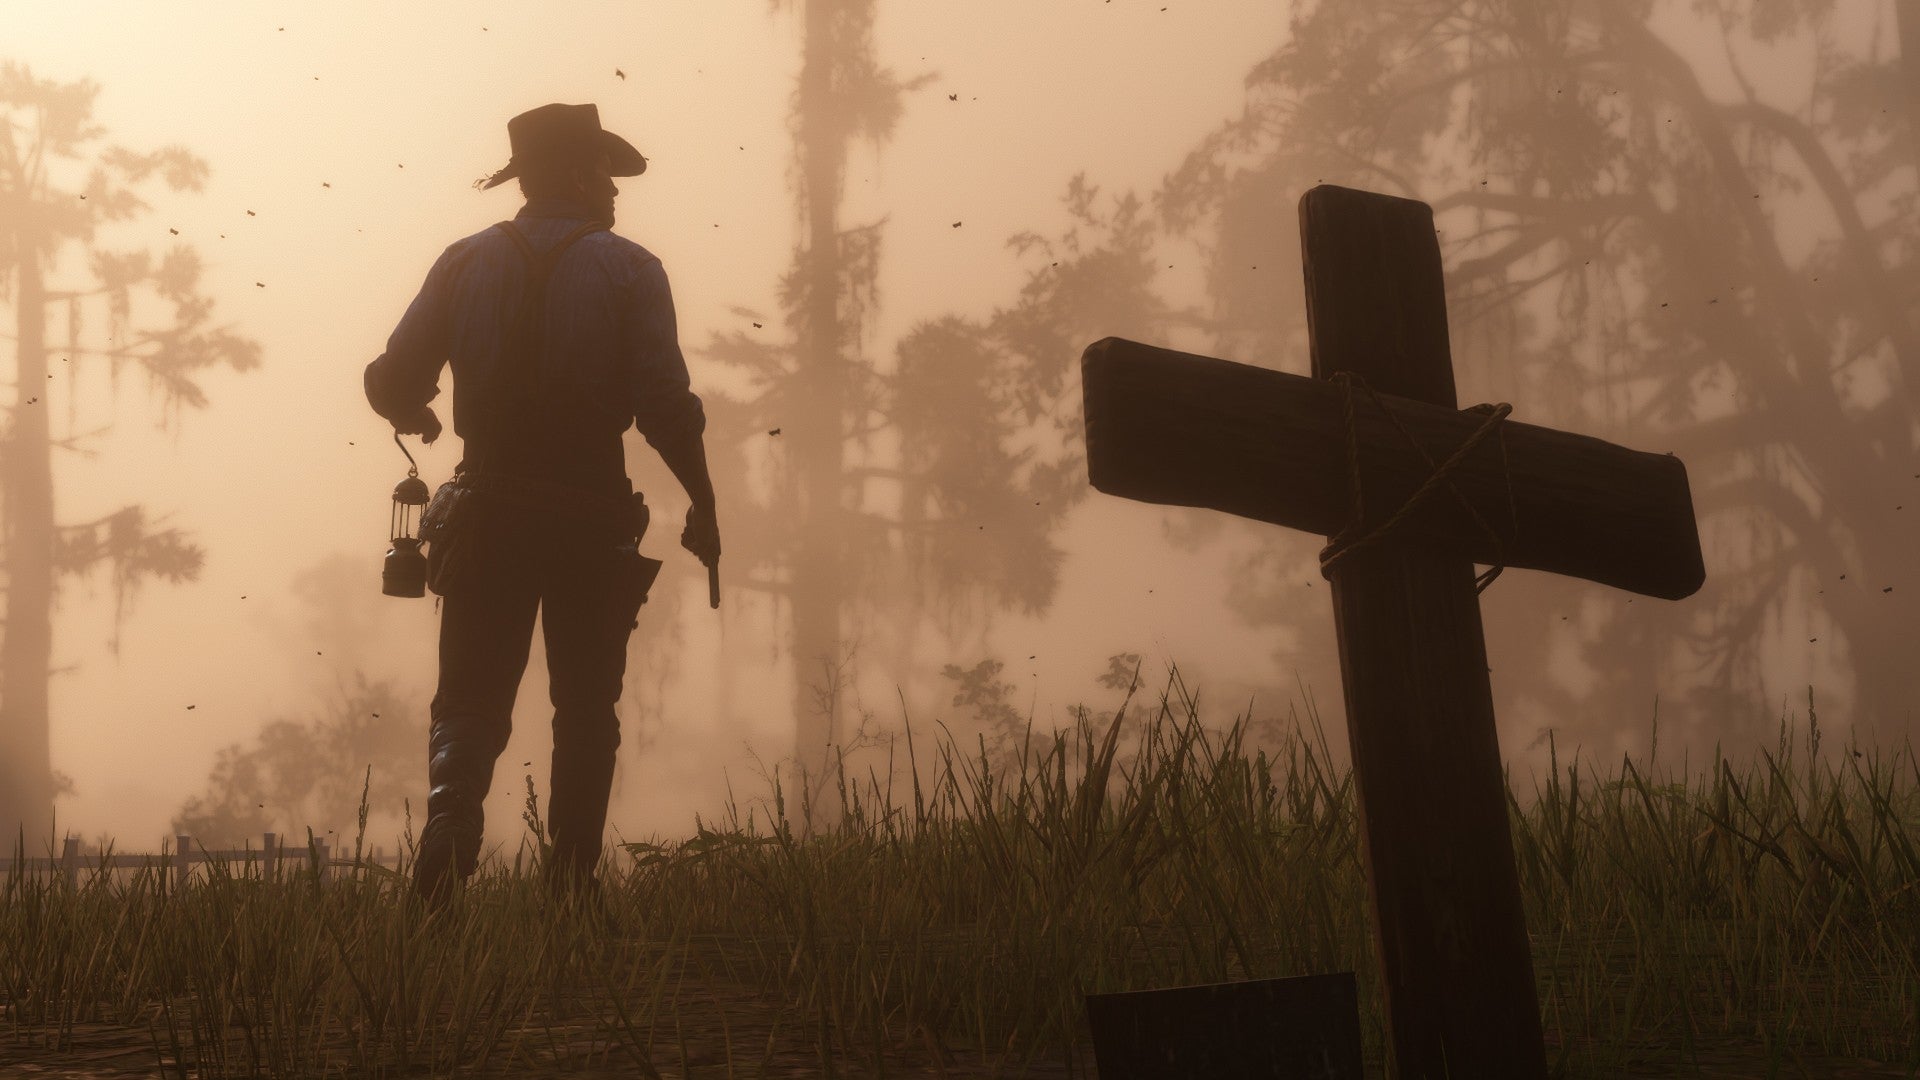 Red Dead Redemption 2 image showing Arthur Morgan holding a lantern at dusk next to a grave marker.